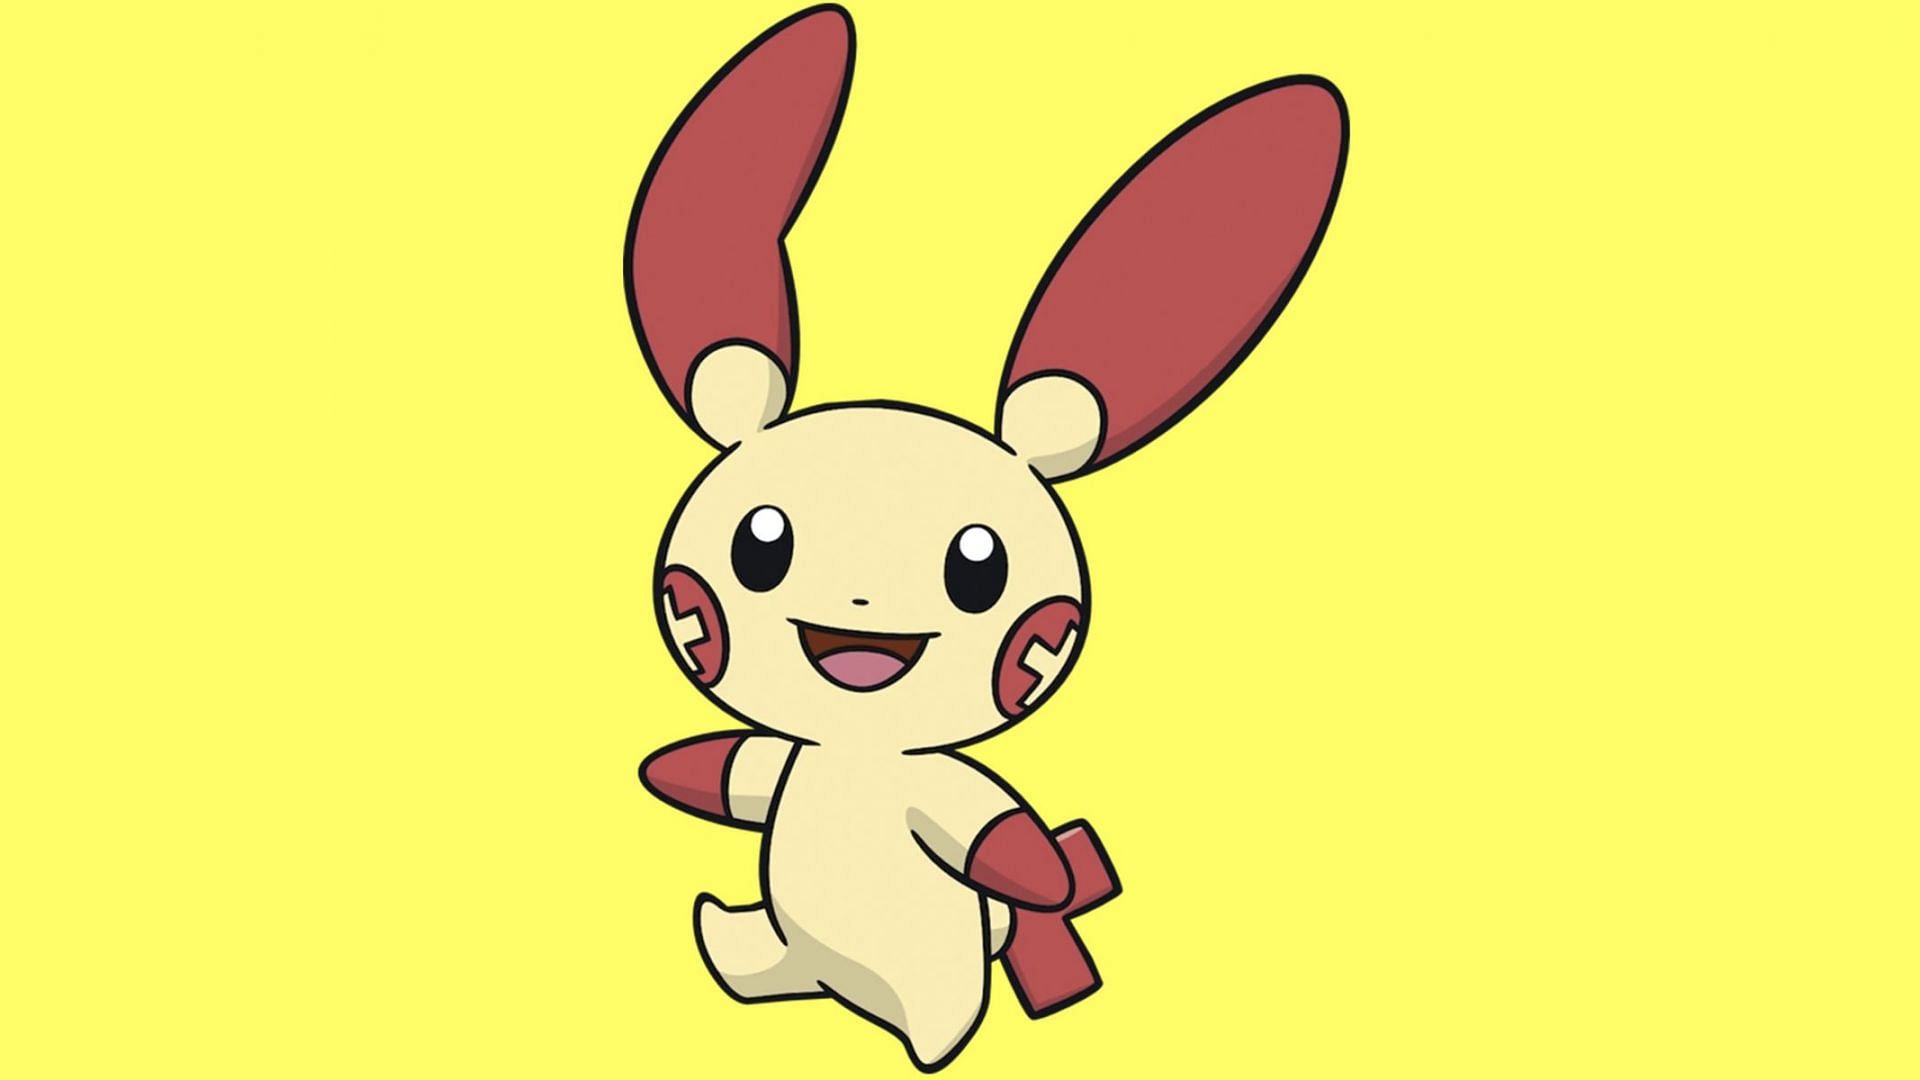 Plusle is the counterpart of Minun, introduced in Generation III (Image via The Pokemon Company)